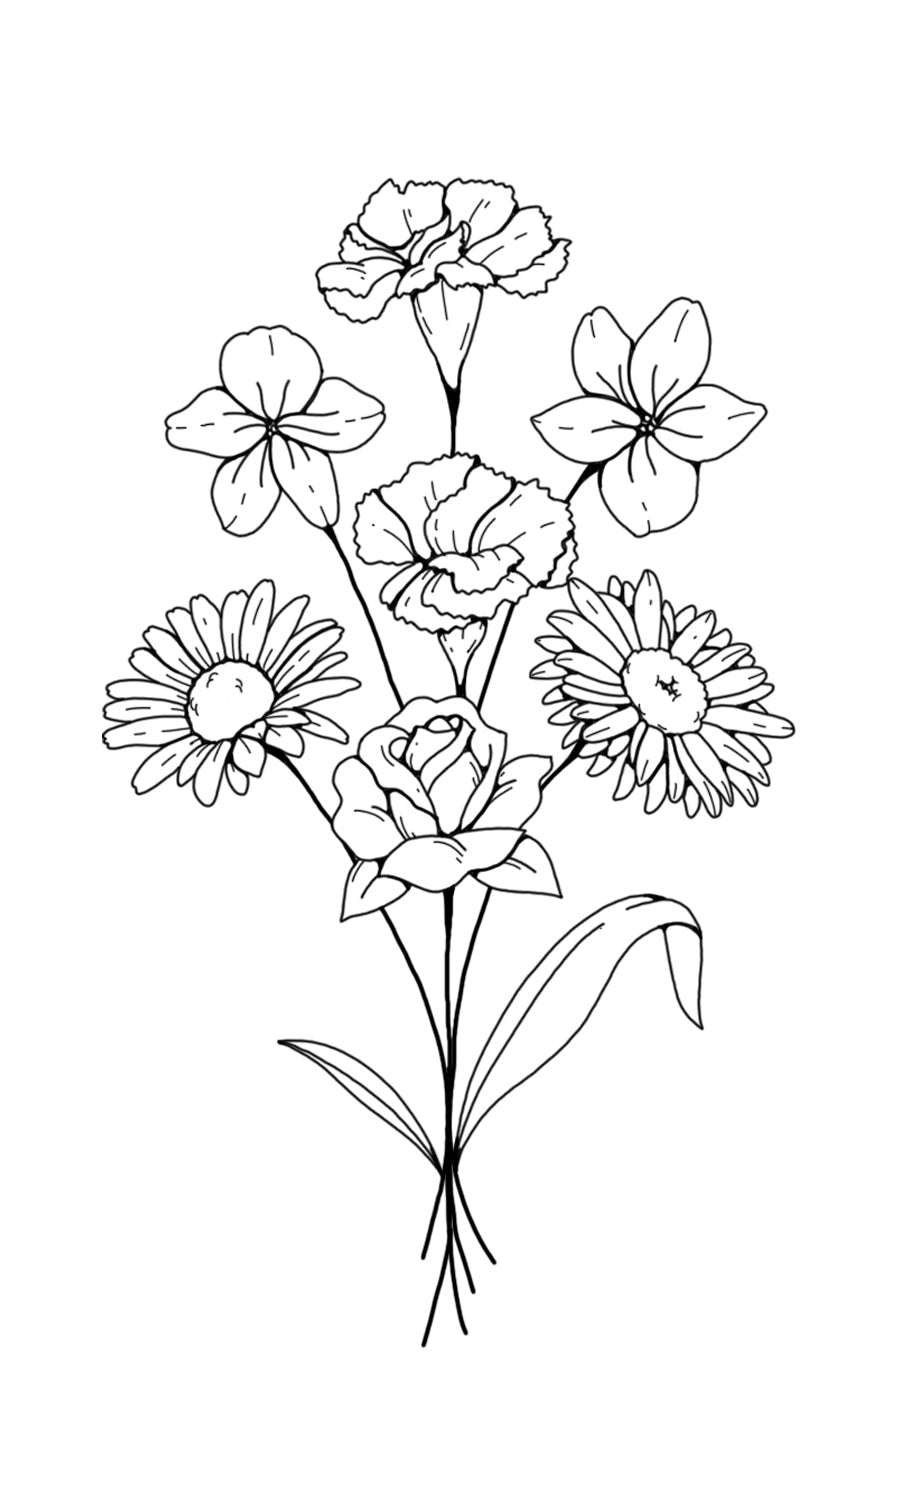 february may and september birth flower tattooTikTok Search